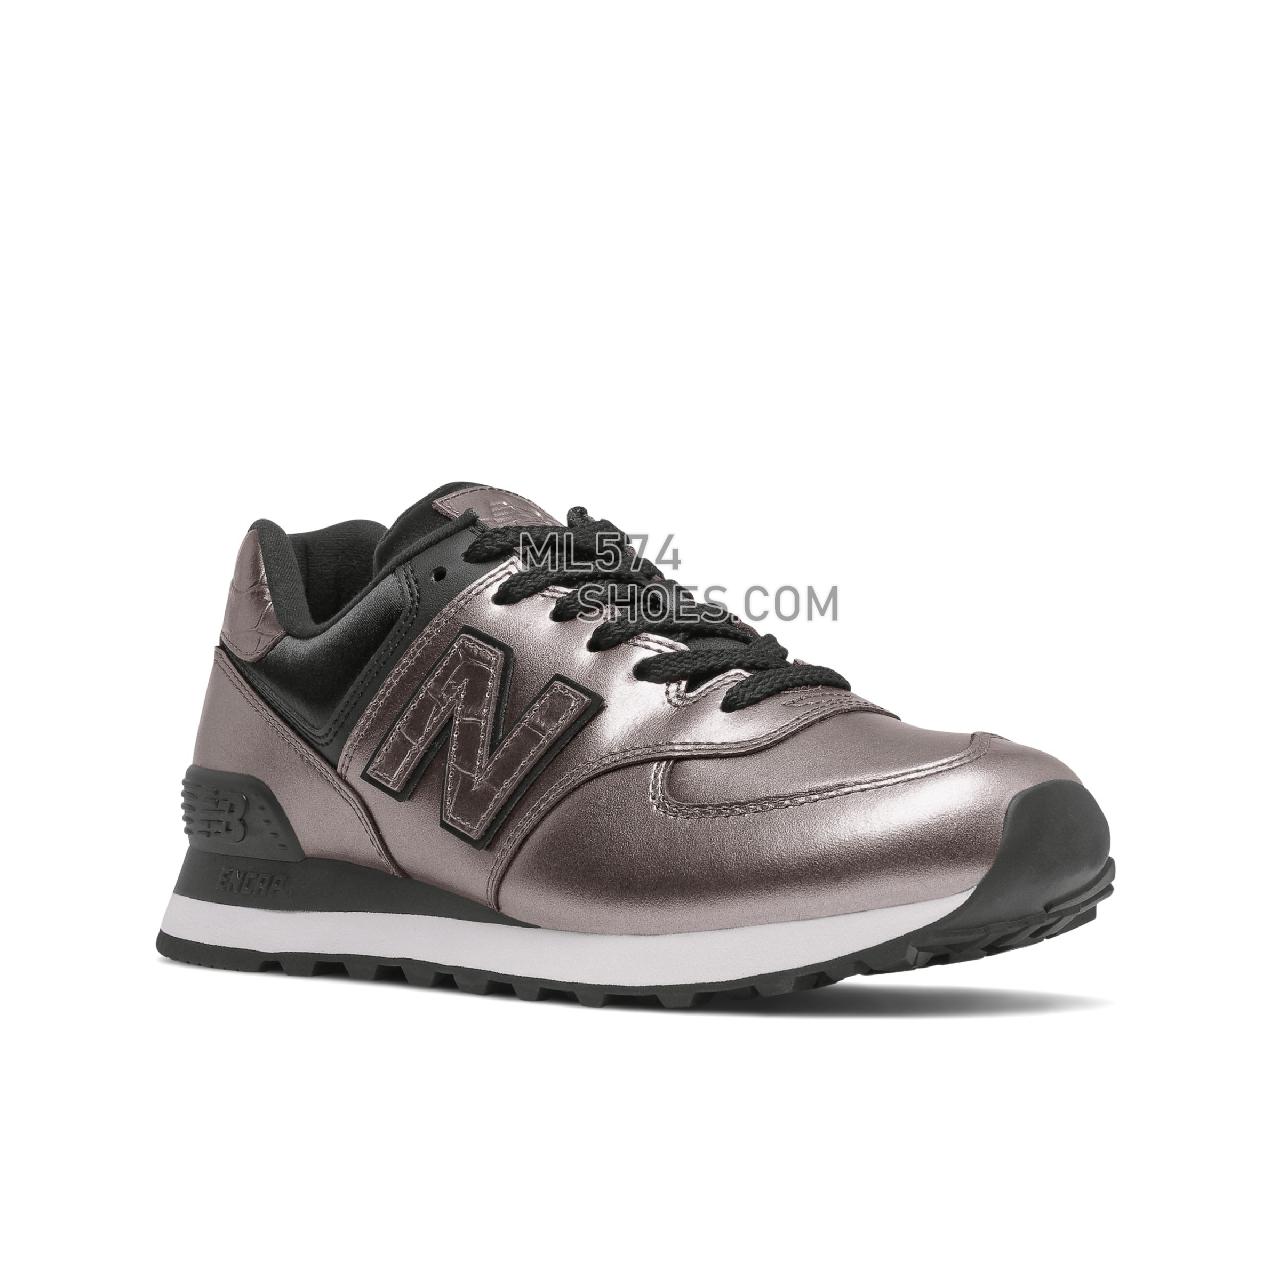 New Balance 574 - Women's Classic Sneakers - Night Tide with Black - WL574PP2